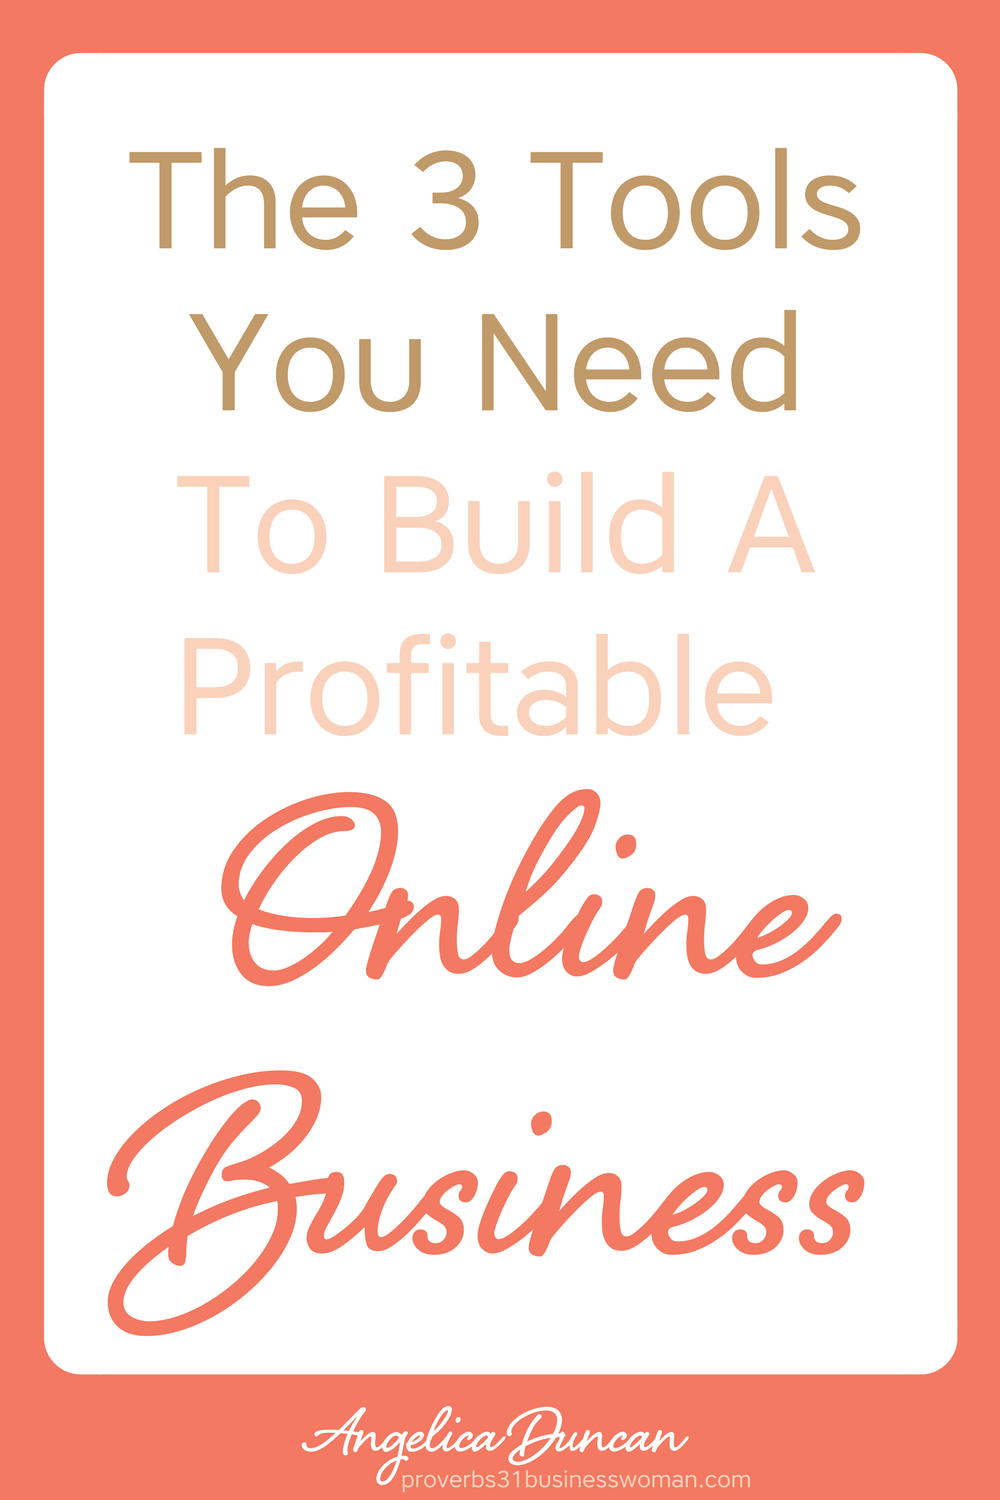 Ready to build your business? Let me show you where to start and how to build a profitable online business. I'm sharing 3 simple tools you need. Let's Go! #facebook #emailmarketing #mompreneur #onlinebusiness #wahm #womeninbusiness #christianbusiness #christianwomeninbusiness #christianentrepreneurs #proverbs31 #proverbs31woman #proverbs31businesswoman #proverbs31enrepreneur #p31 #angelicaduncan #silkoversteel #sos